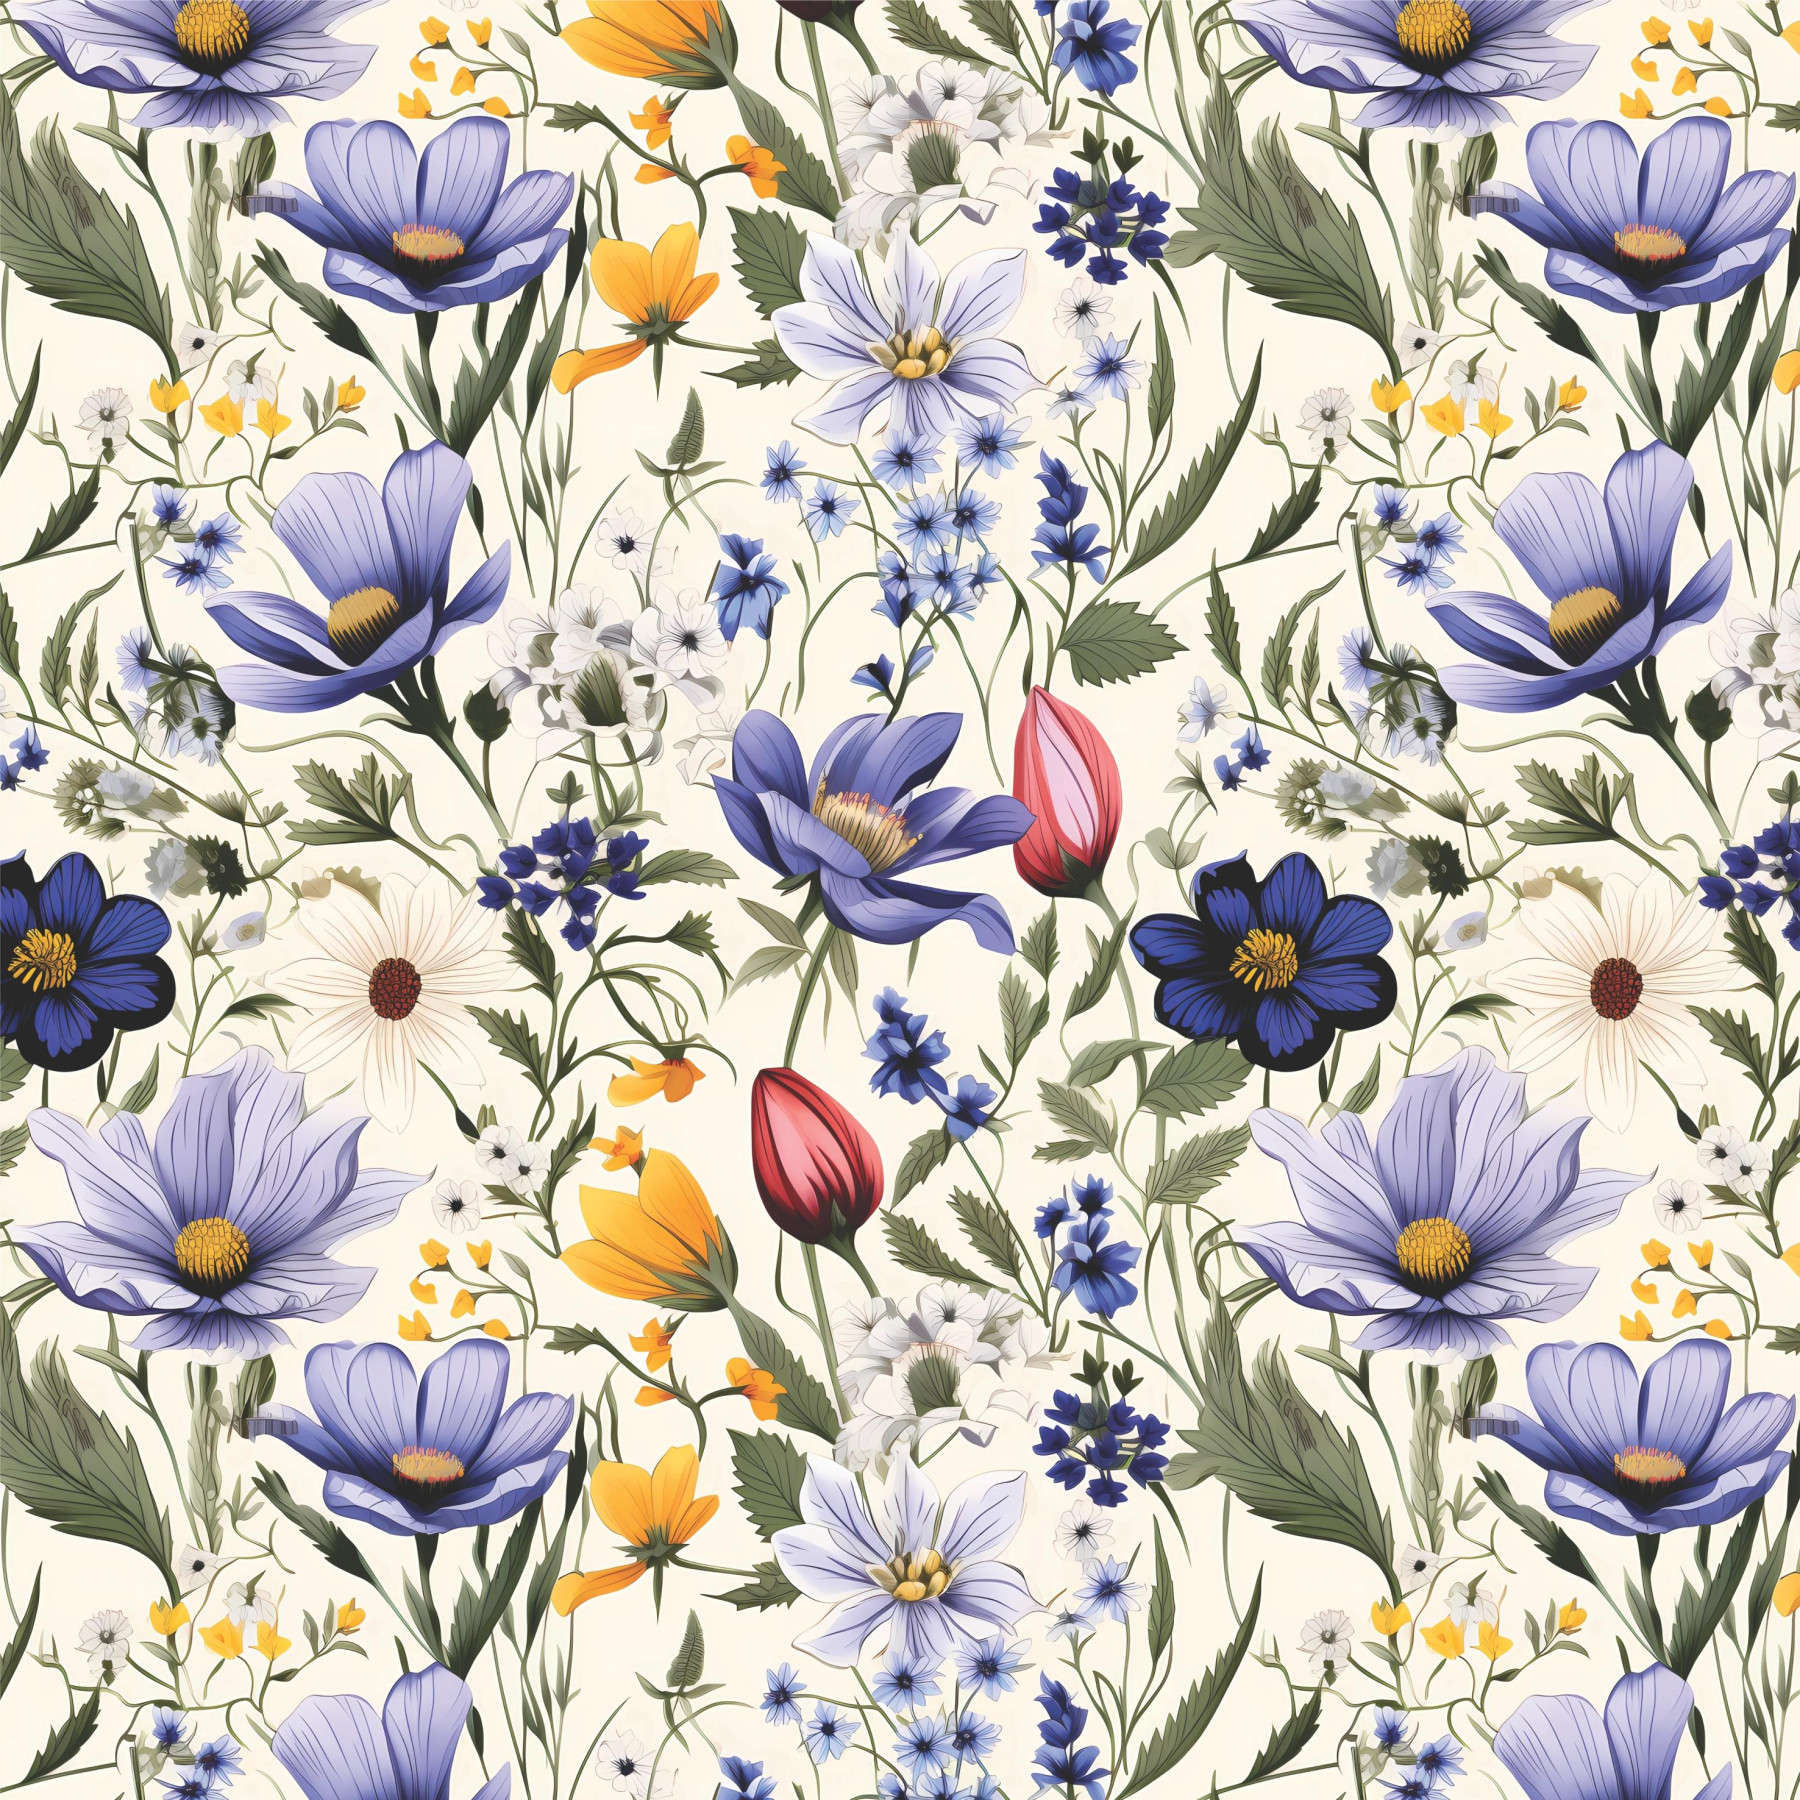 FLOWERS wz.4 - Woven Fabric for tablecloths